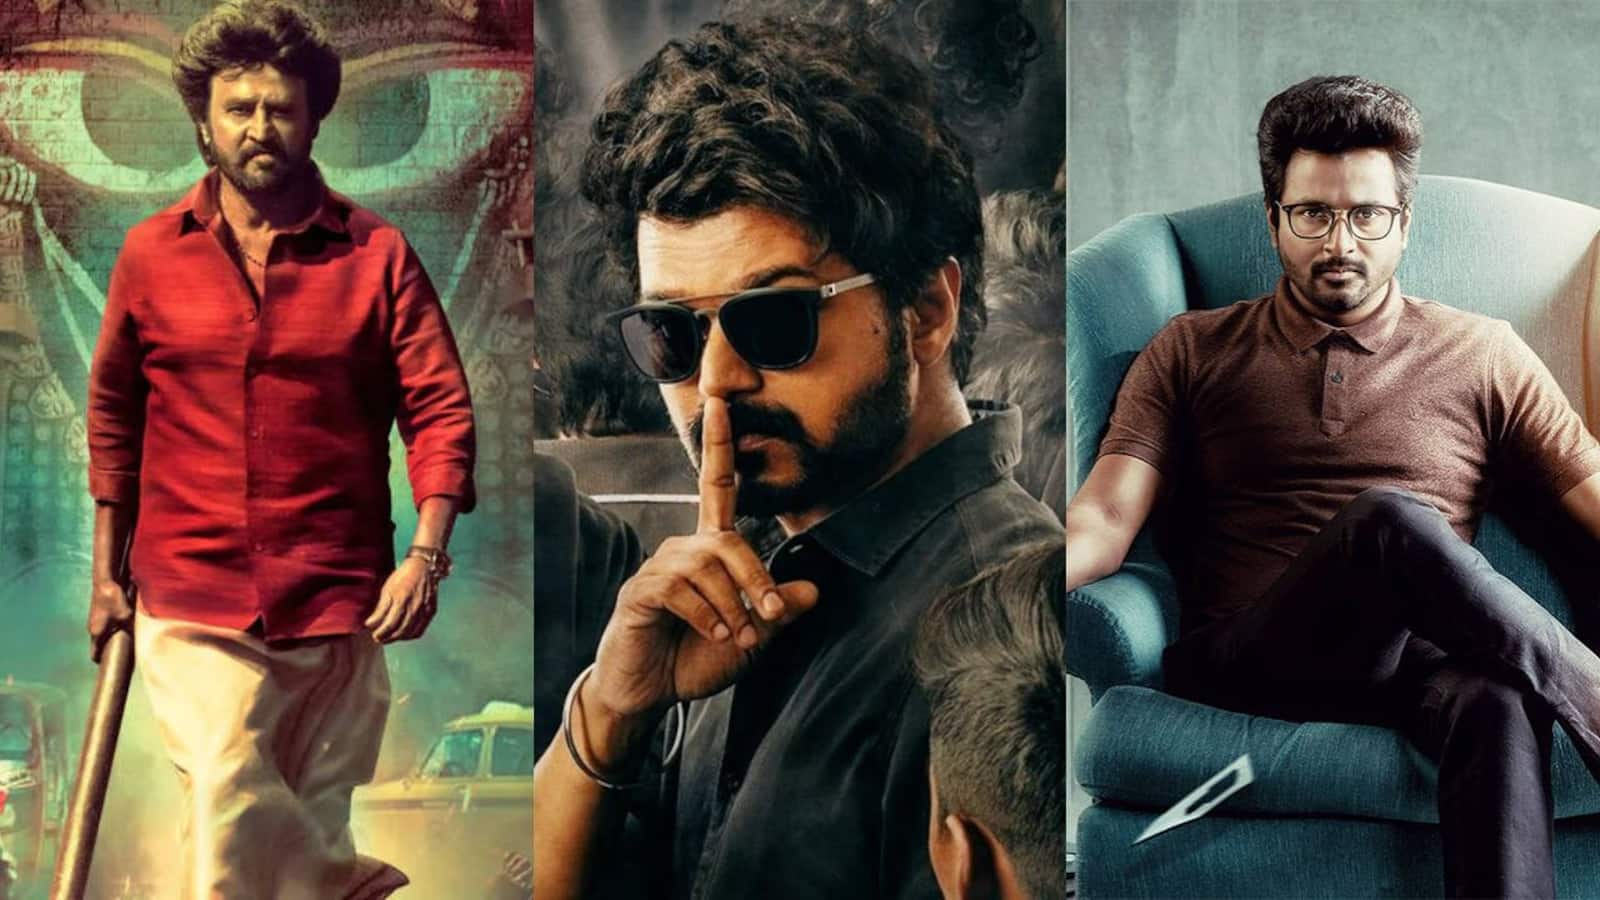 Master, Annaatthe, Doctor – check out the HIGHEST GROSSING Tamil movies of 2021 starring Thalapathy Vijay, Rajinikanth, Sivakarthikeyan and others